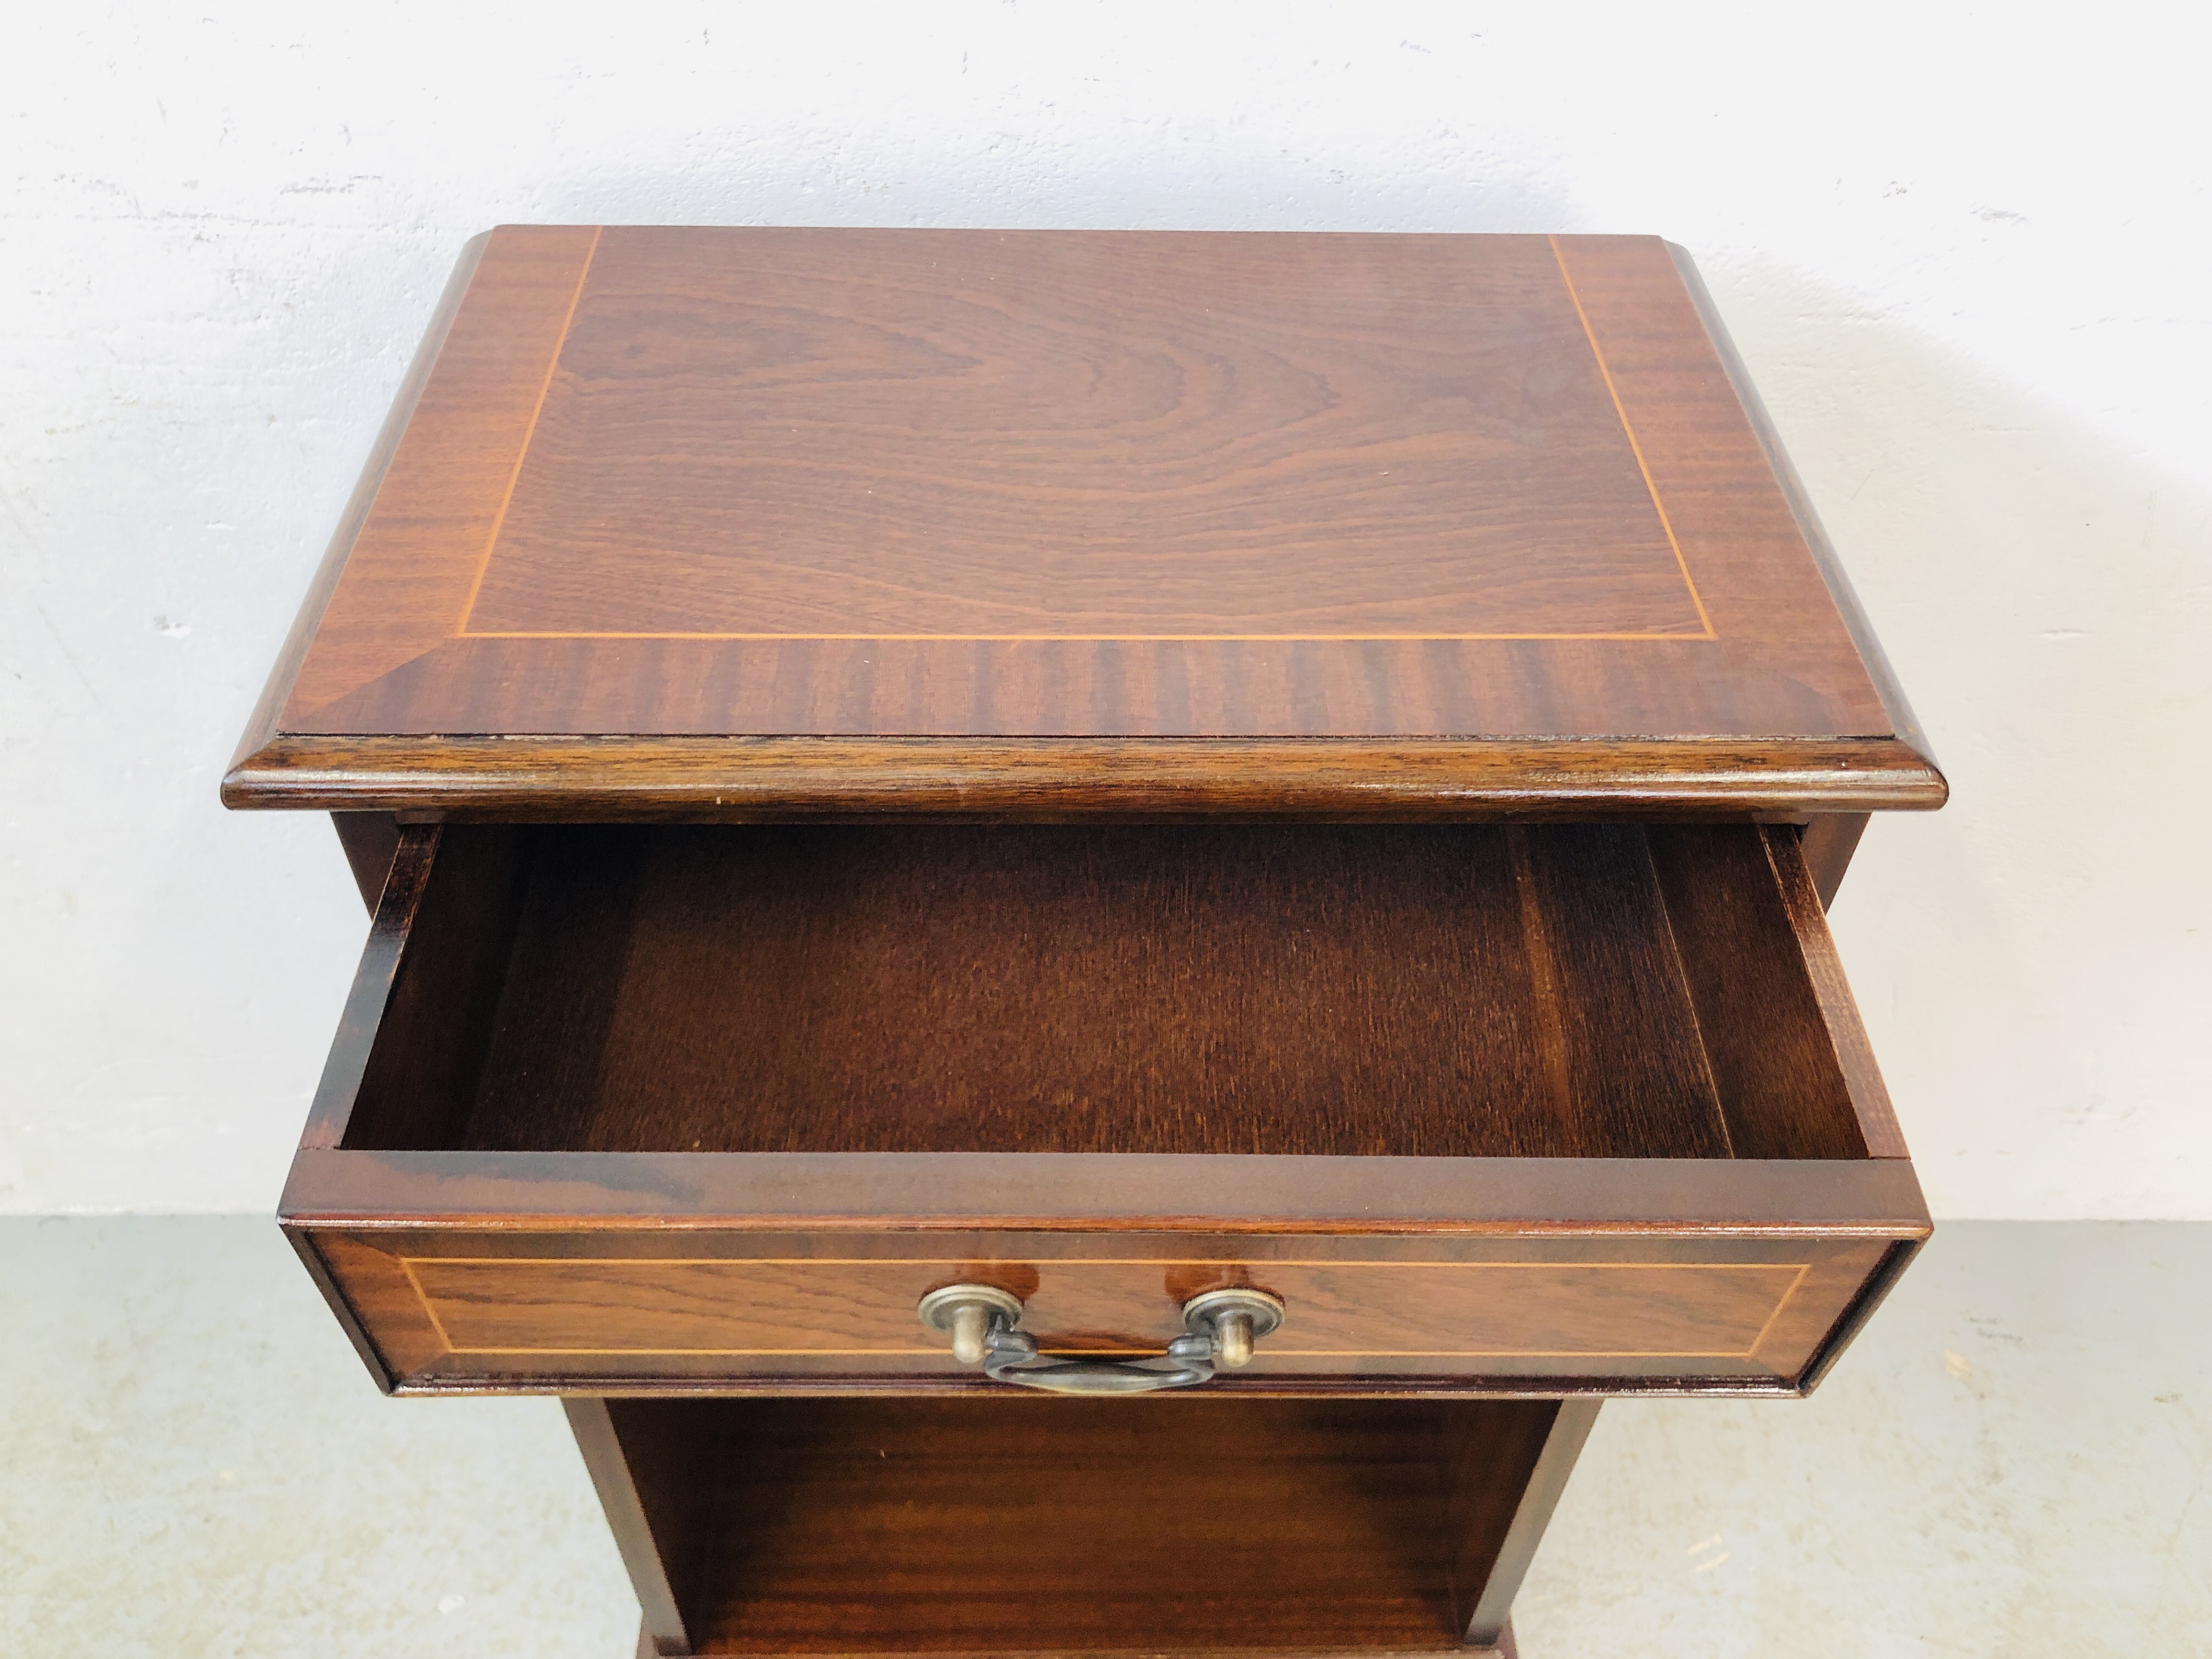 A REPRODUCTION MAHOGANY FINISH COFFEE TABLE AND A ONE DRAWER OVER SHELF BOOK CASE ( DRAWER 49CM. - Image 8 of 11